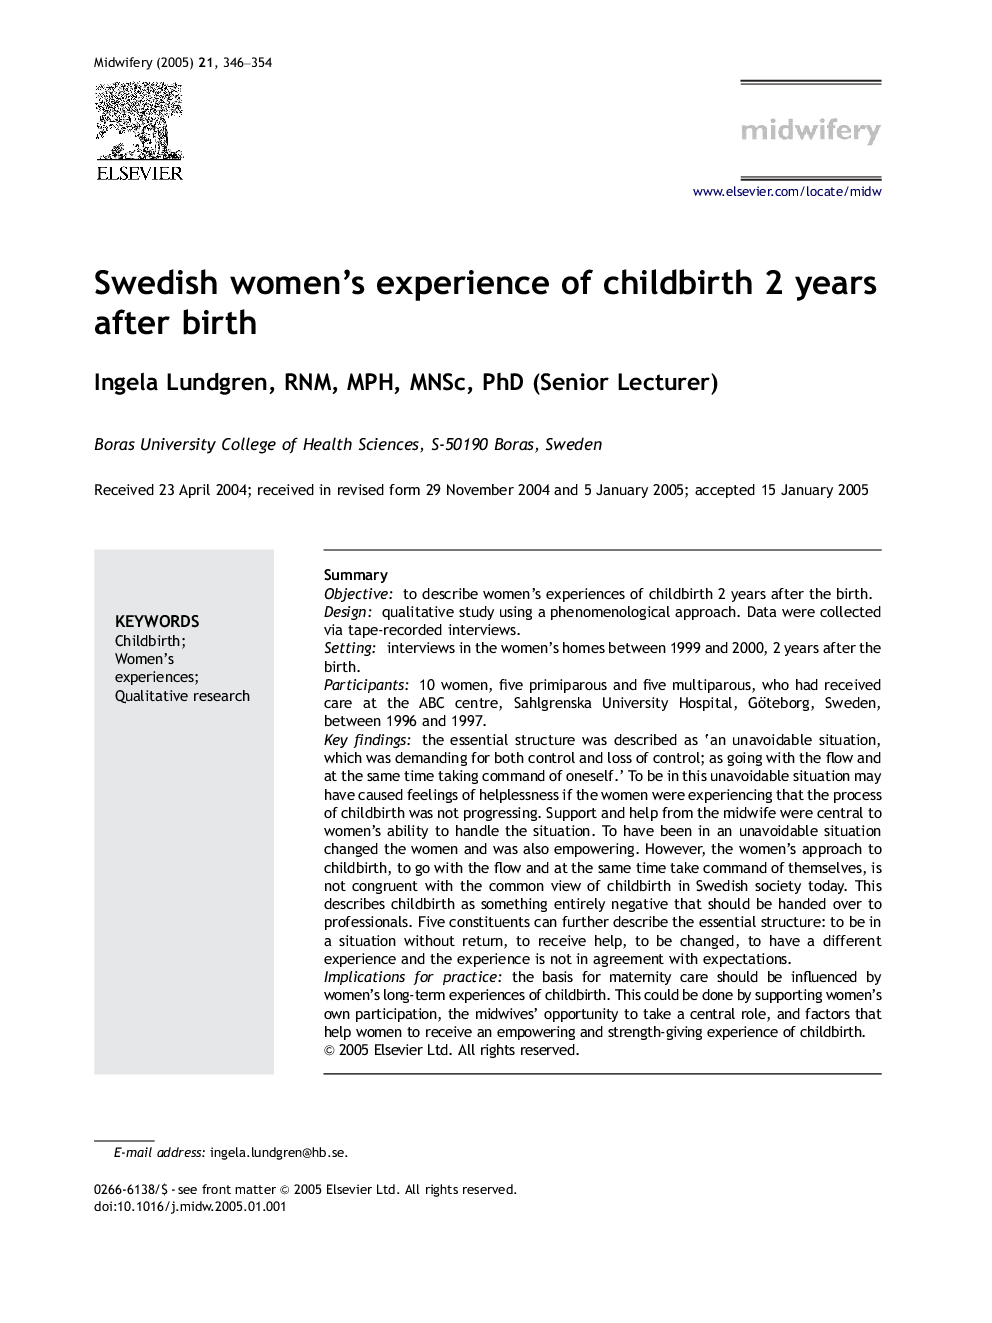 Swedish women's experience of childbirth 2 years after birth